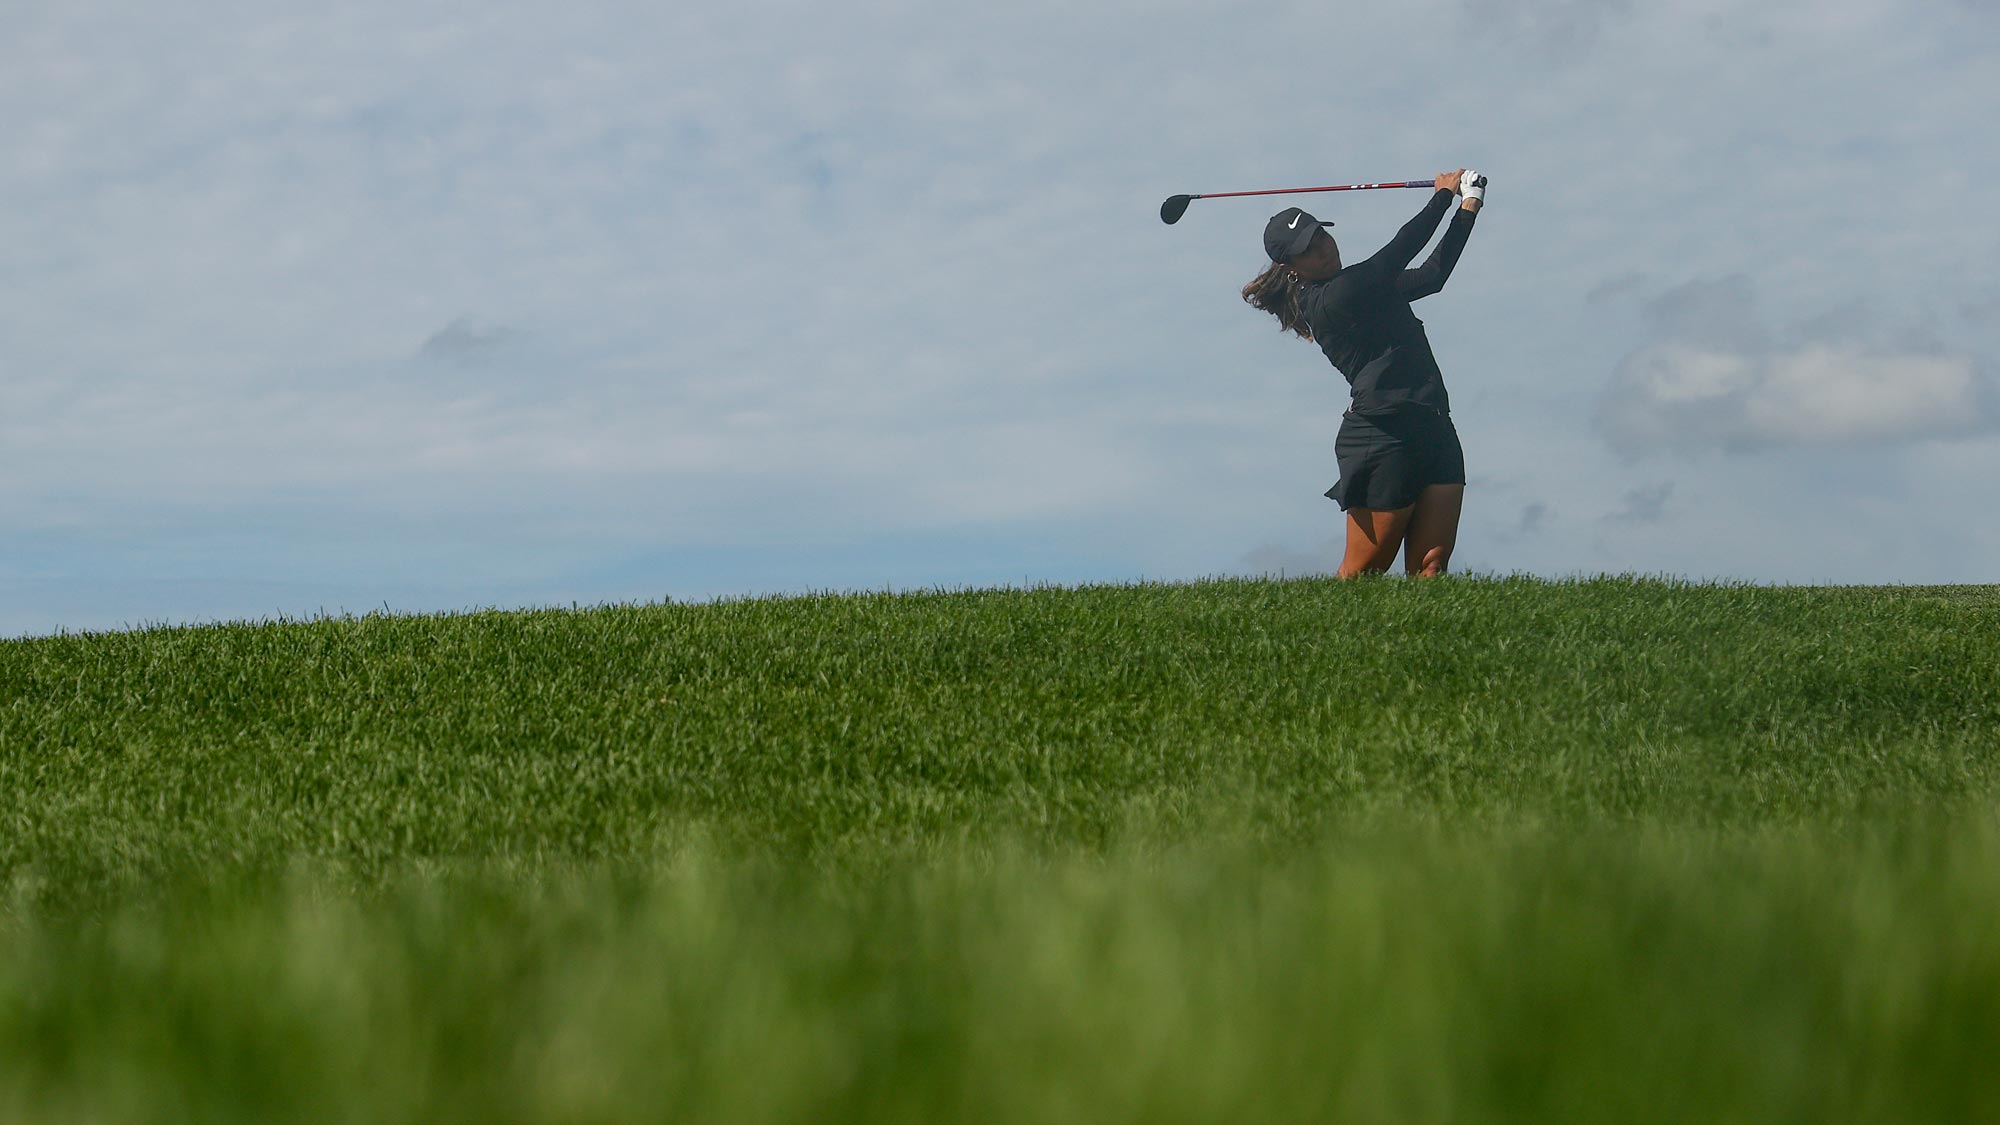 Cheyenne Woods plays her shot from the 15th tee during the first round of the LPGA Drive On Championship at Inverness Club on July 31, 2020 in Toledo, Ohio.